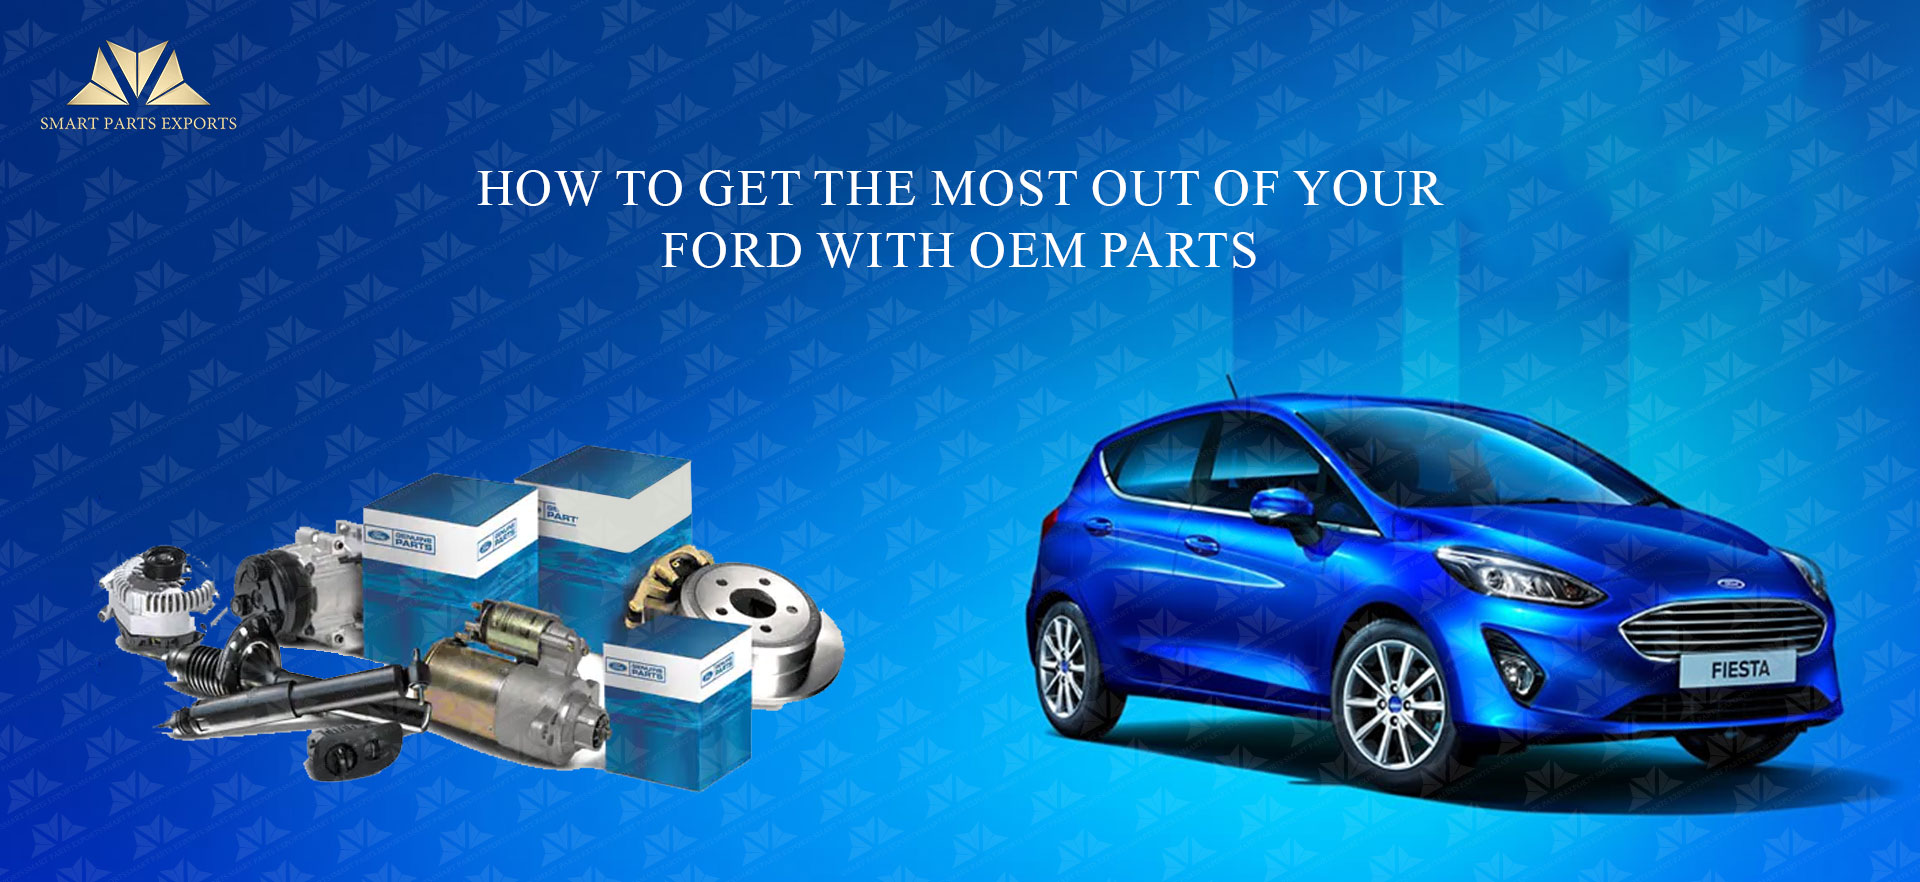 How to Get the Most Out of Your Ford with OEM Parts